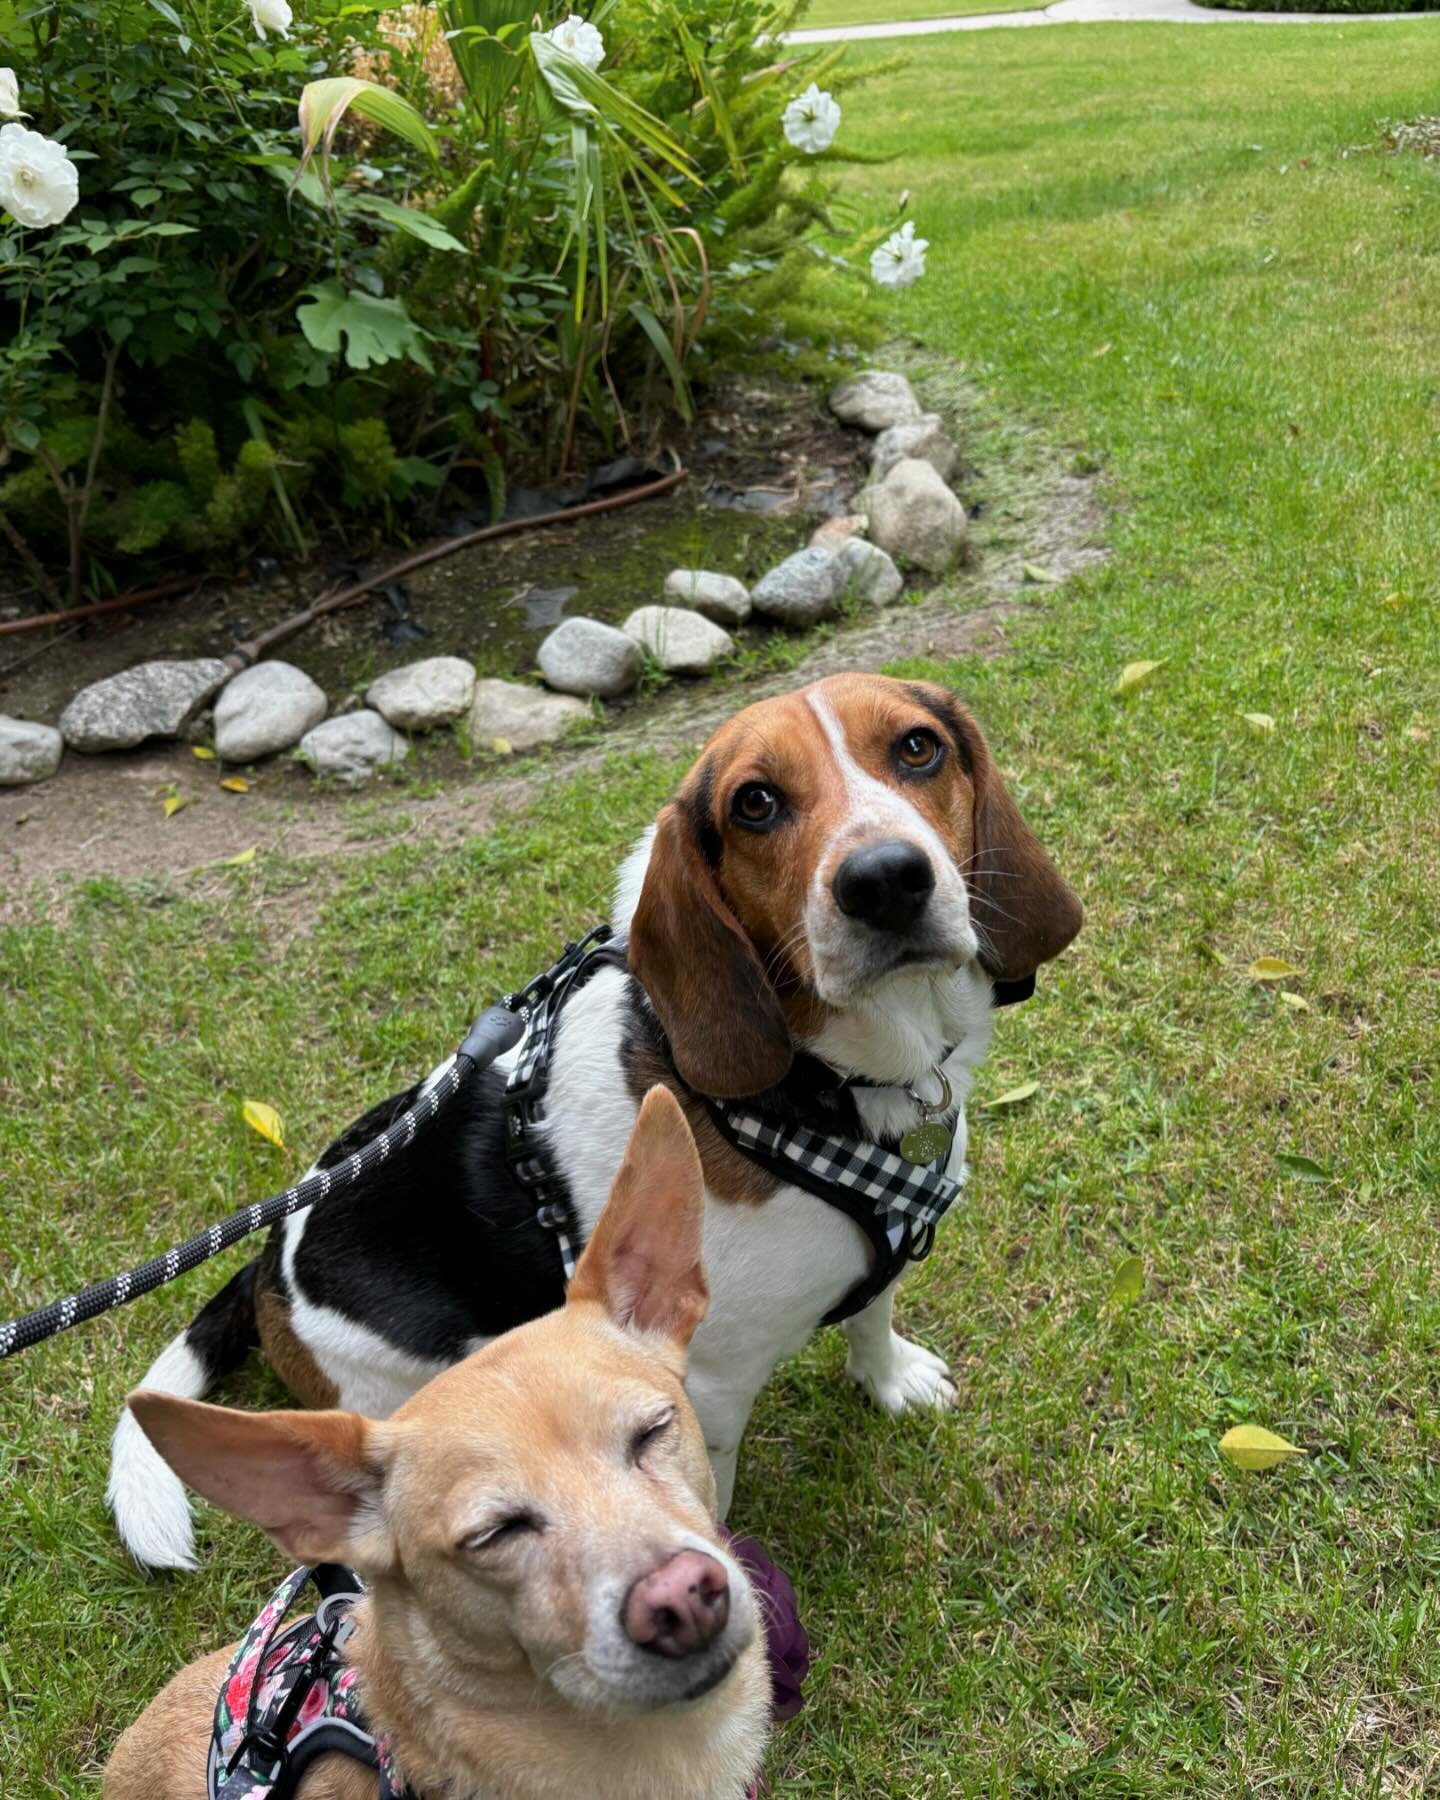 Horace and Bambi were a hit at their paw-rents&rsquo; wedding! 🐶❤️✨ Just look at their little flower and bow tie. 🥹💖 #weddings #dogsinweddings #dogsofinstagram #weddingvendor